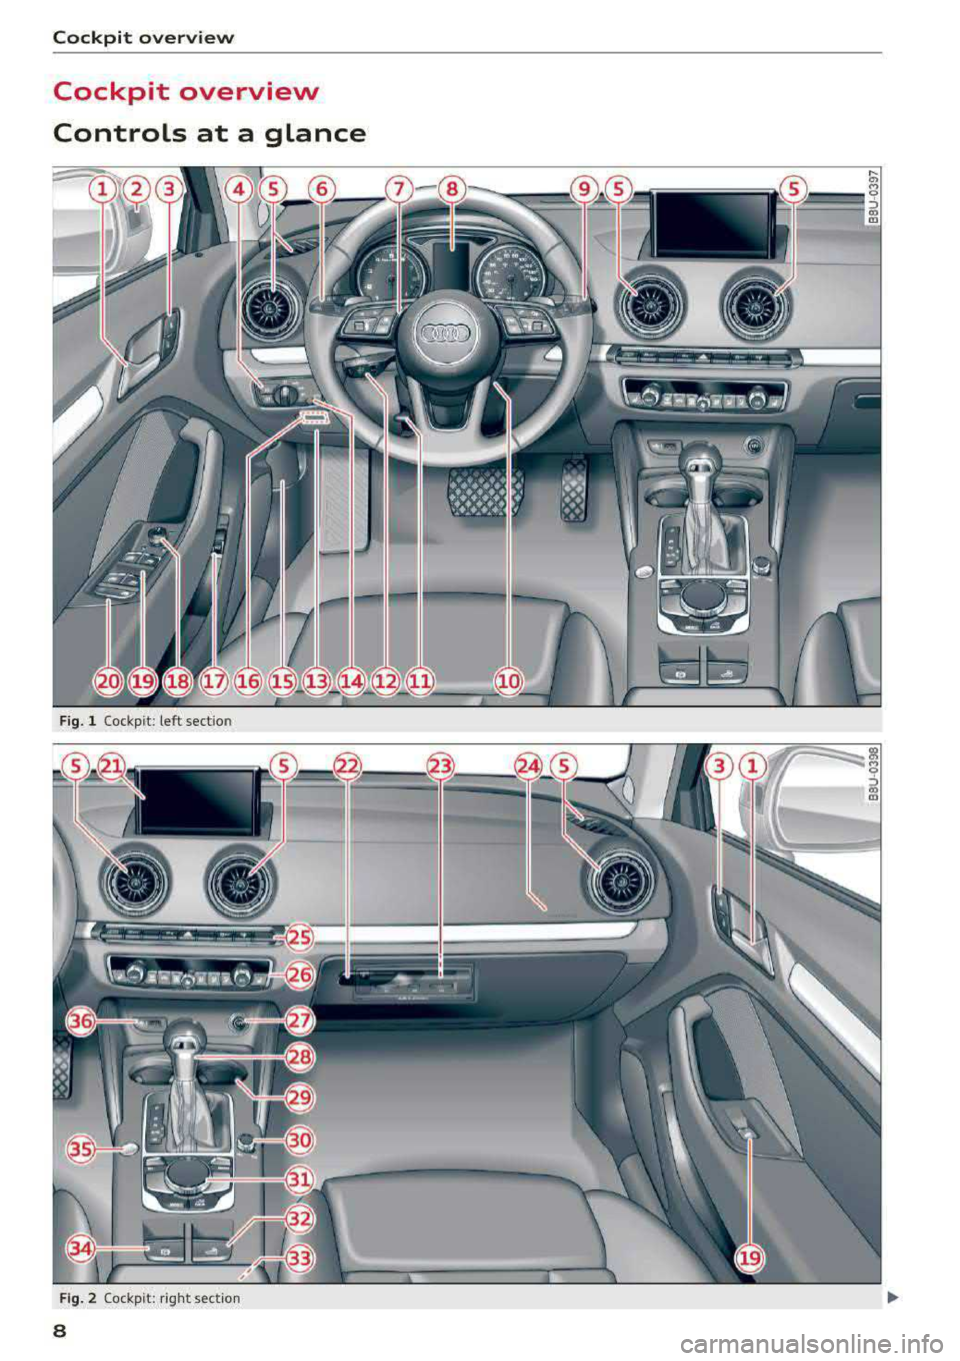 AUDI A3 SEDAN 2017  Owners Manual Cockpit  overview 
Cockpit  overview  
Controls  at  a  glance 
c::: 
F ig.  1  Cockpit : left  section 
F ig.  2  Cockpit:  rig ht sect ion 
8 
:;; M 9 ::i CX) a,  